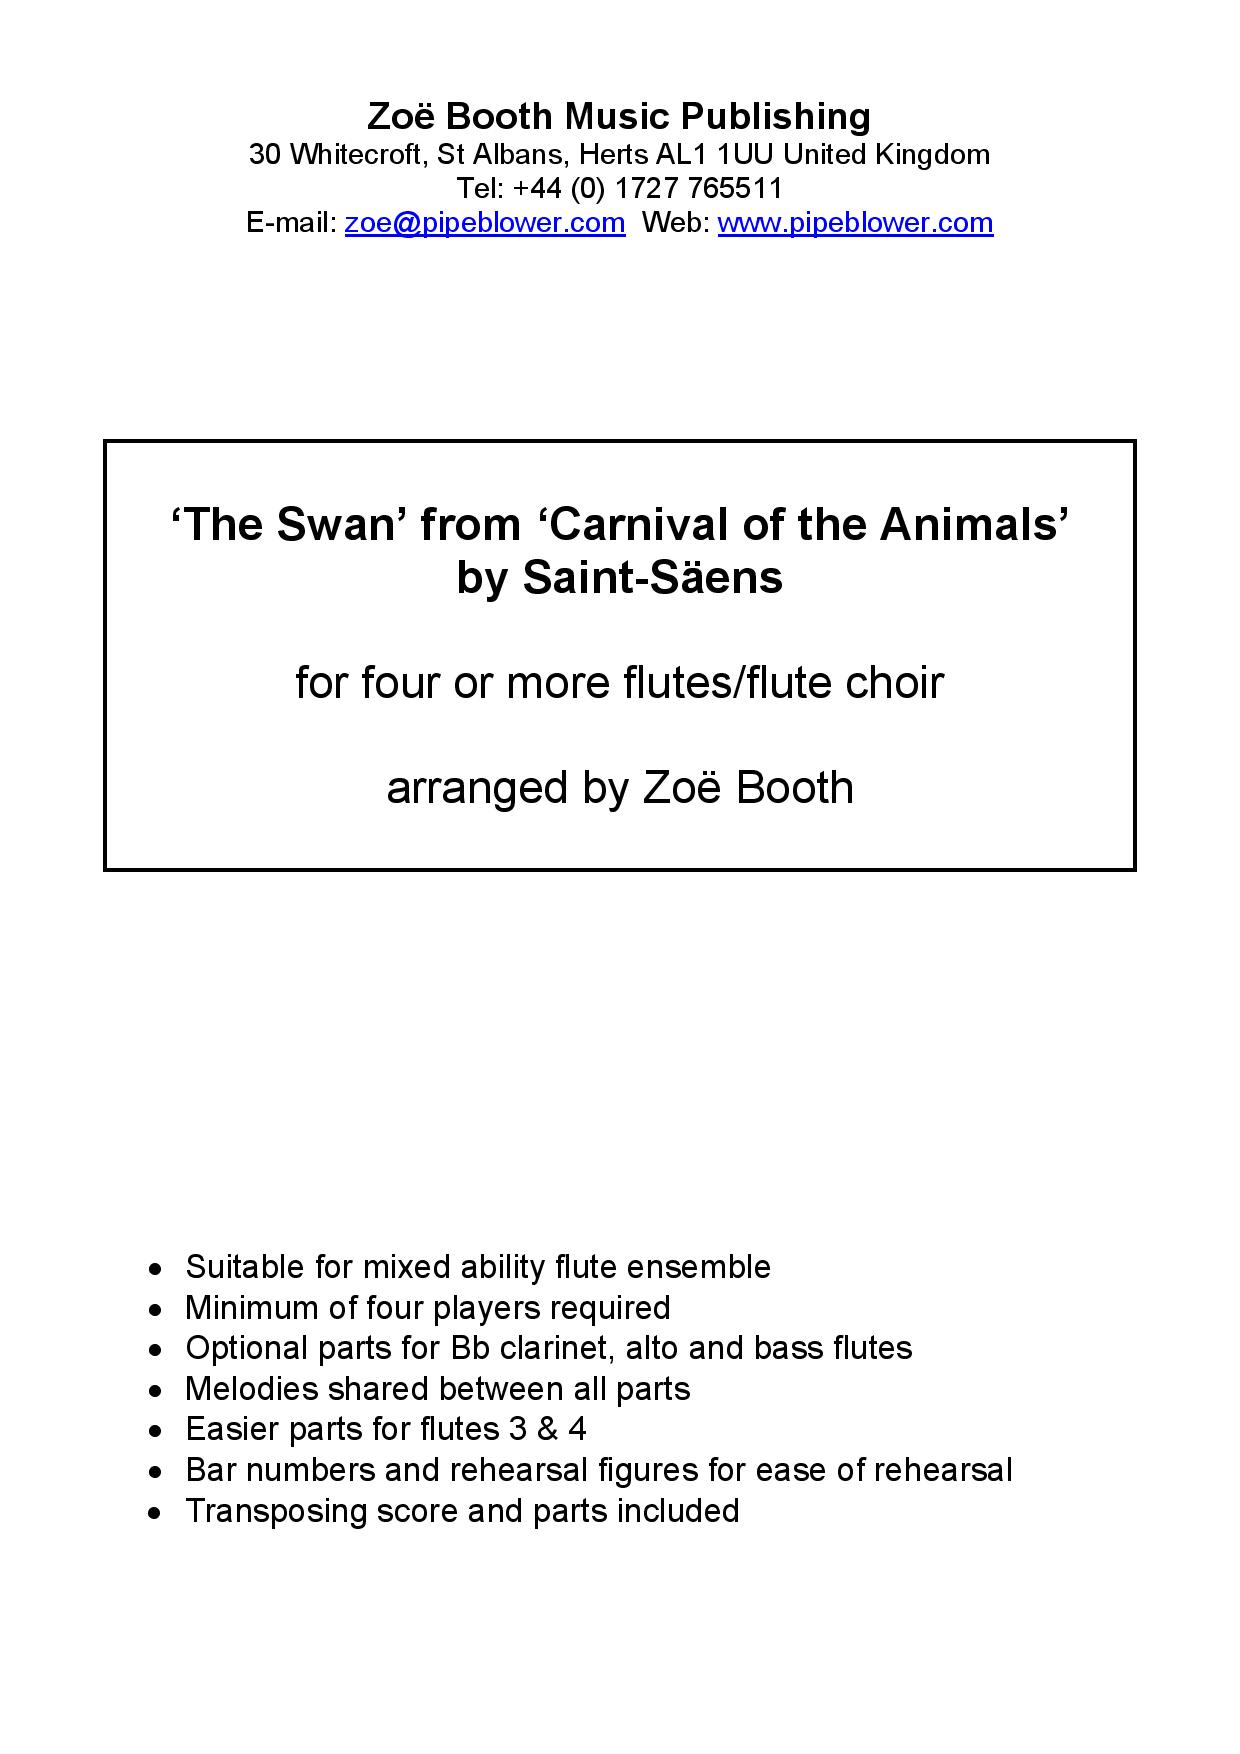 The Swan by Saint-Saëns  arranged by Zoë Booth for four or more flutes/flute choir